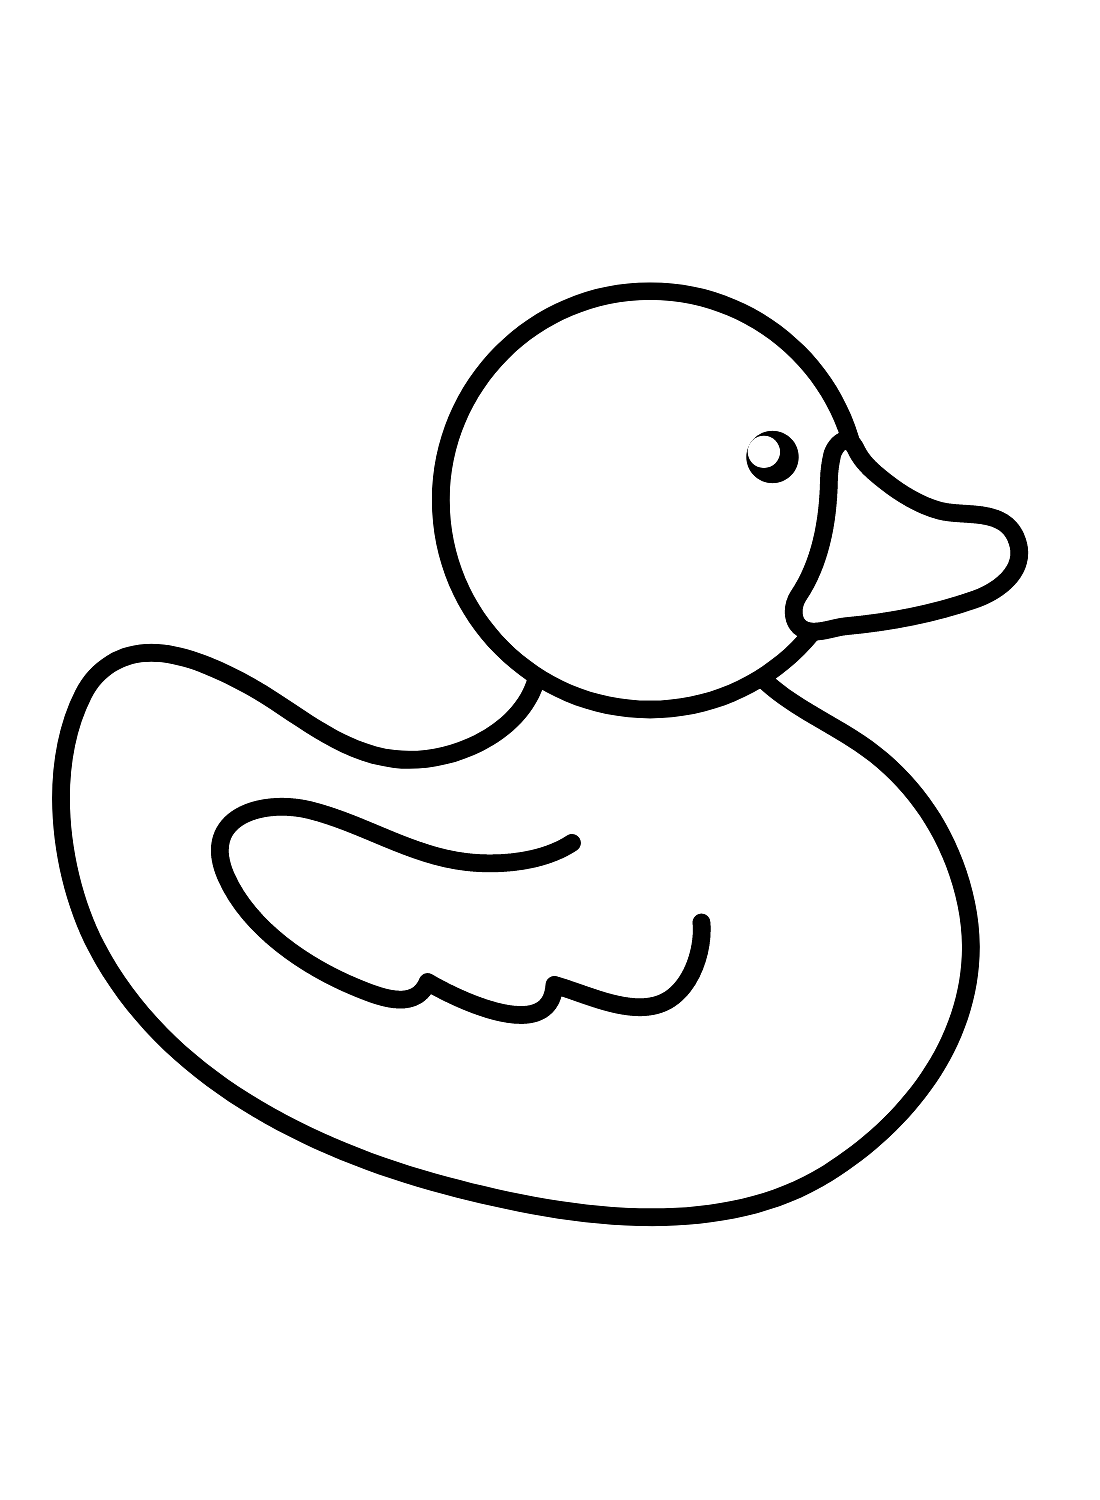 Children Toy Rubber Duckie Coloring Page